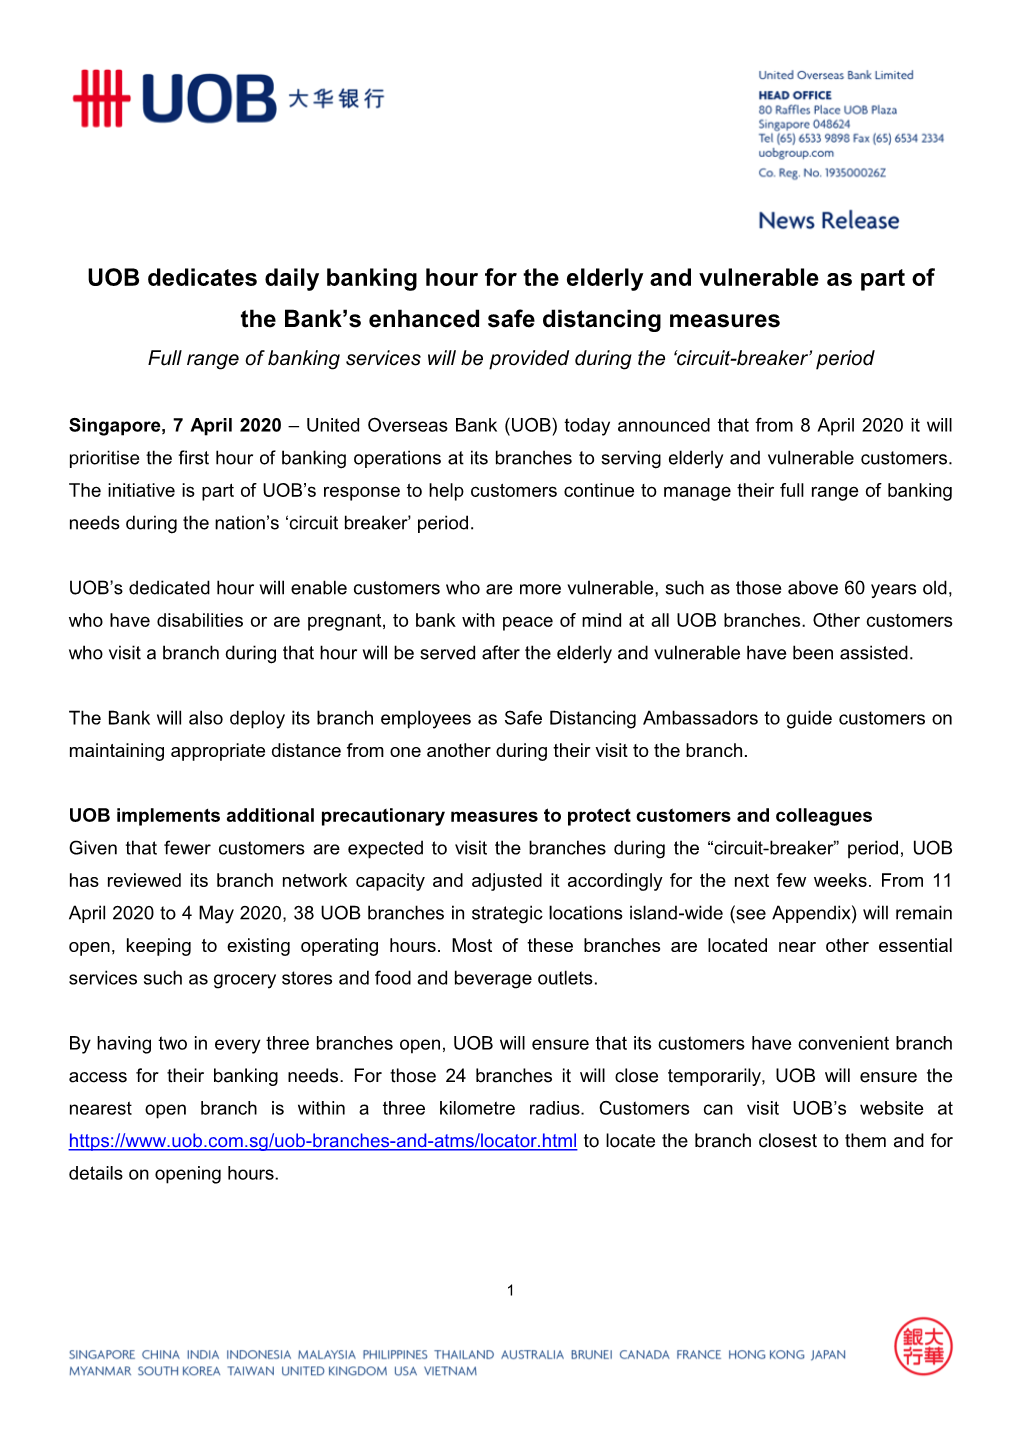 UOB Dedicates Daily Banking Hour for the Elderly and Vulnerable As Part Of